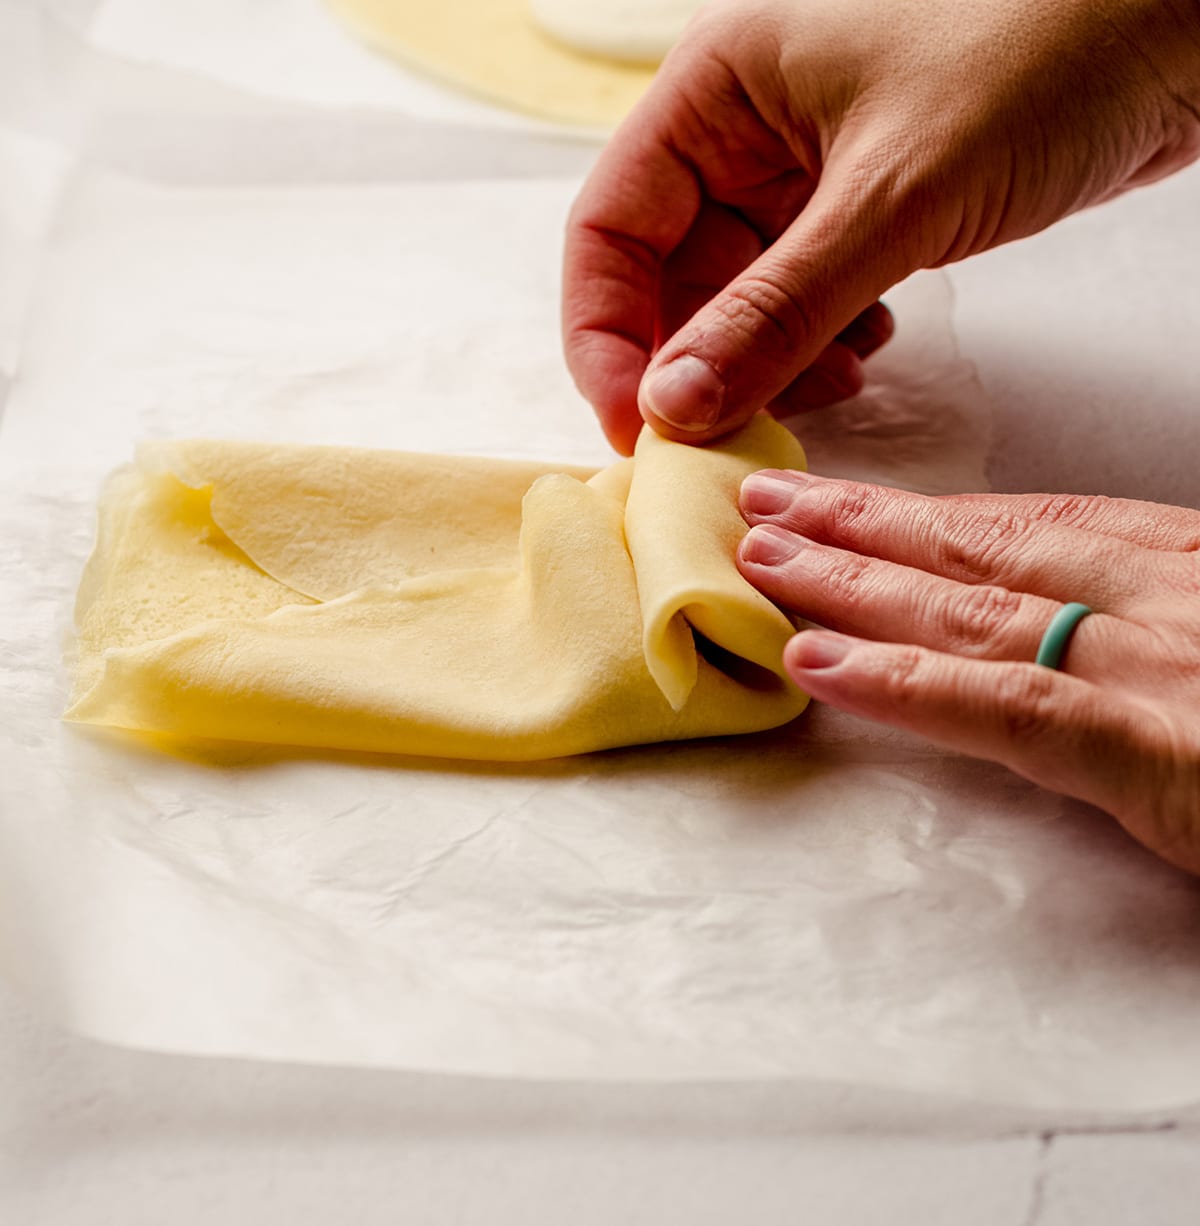 Rolling cheese blintzes by hand.